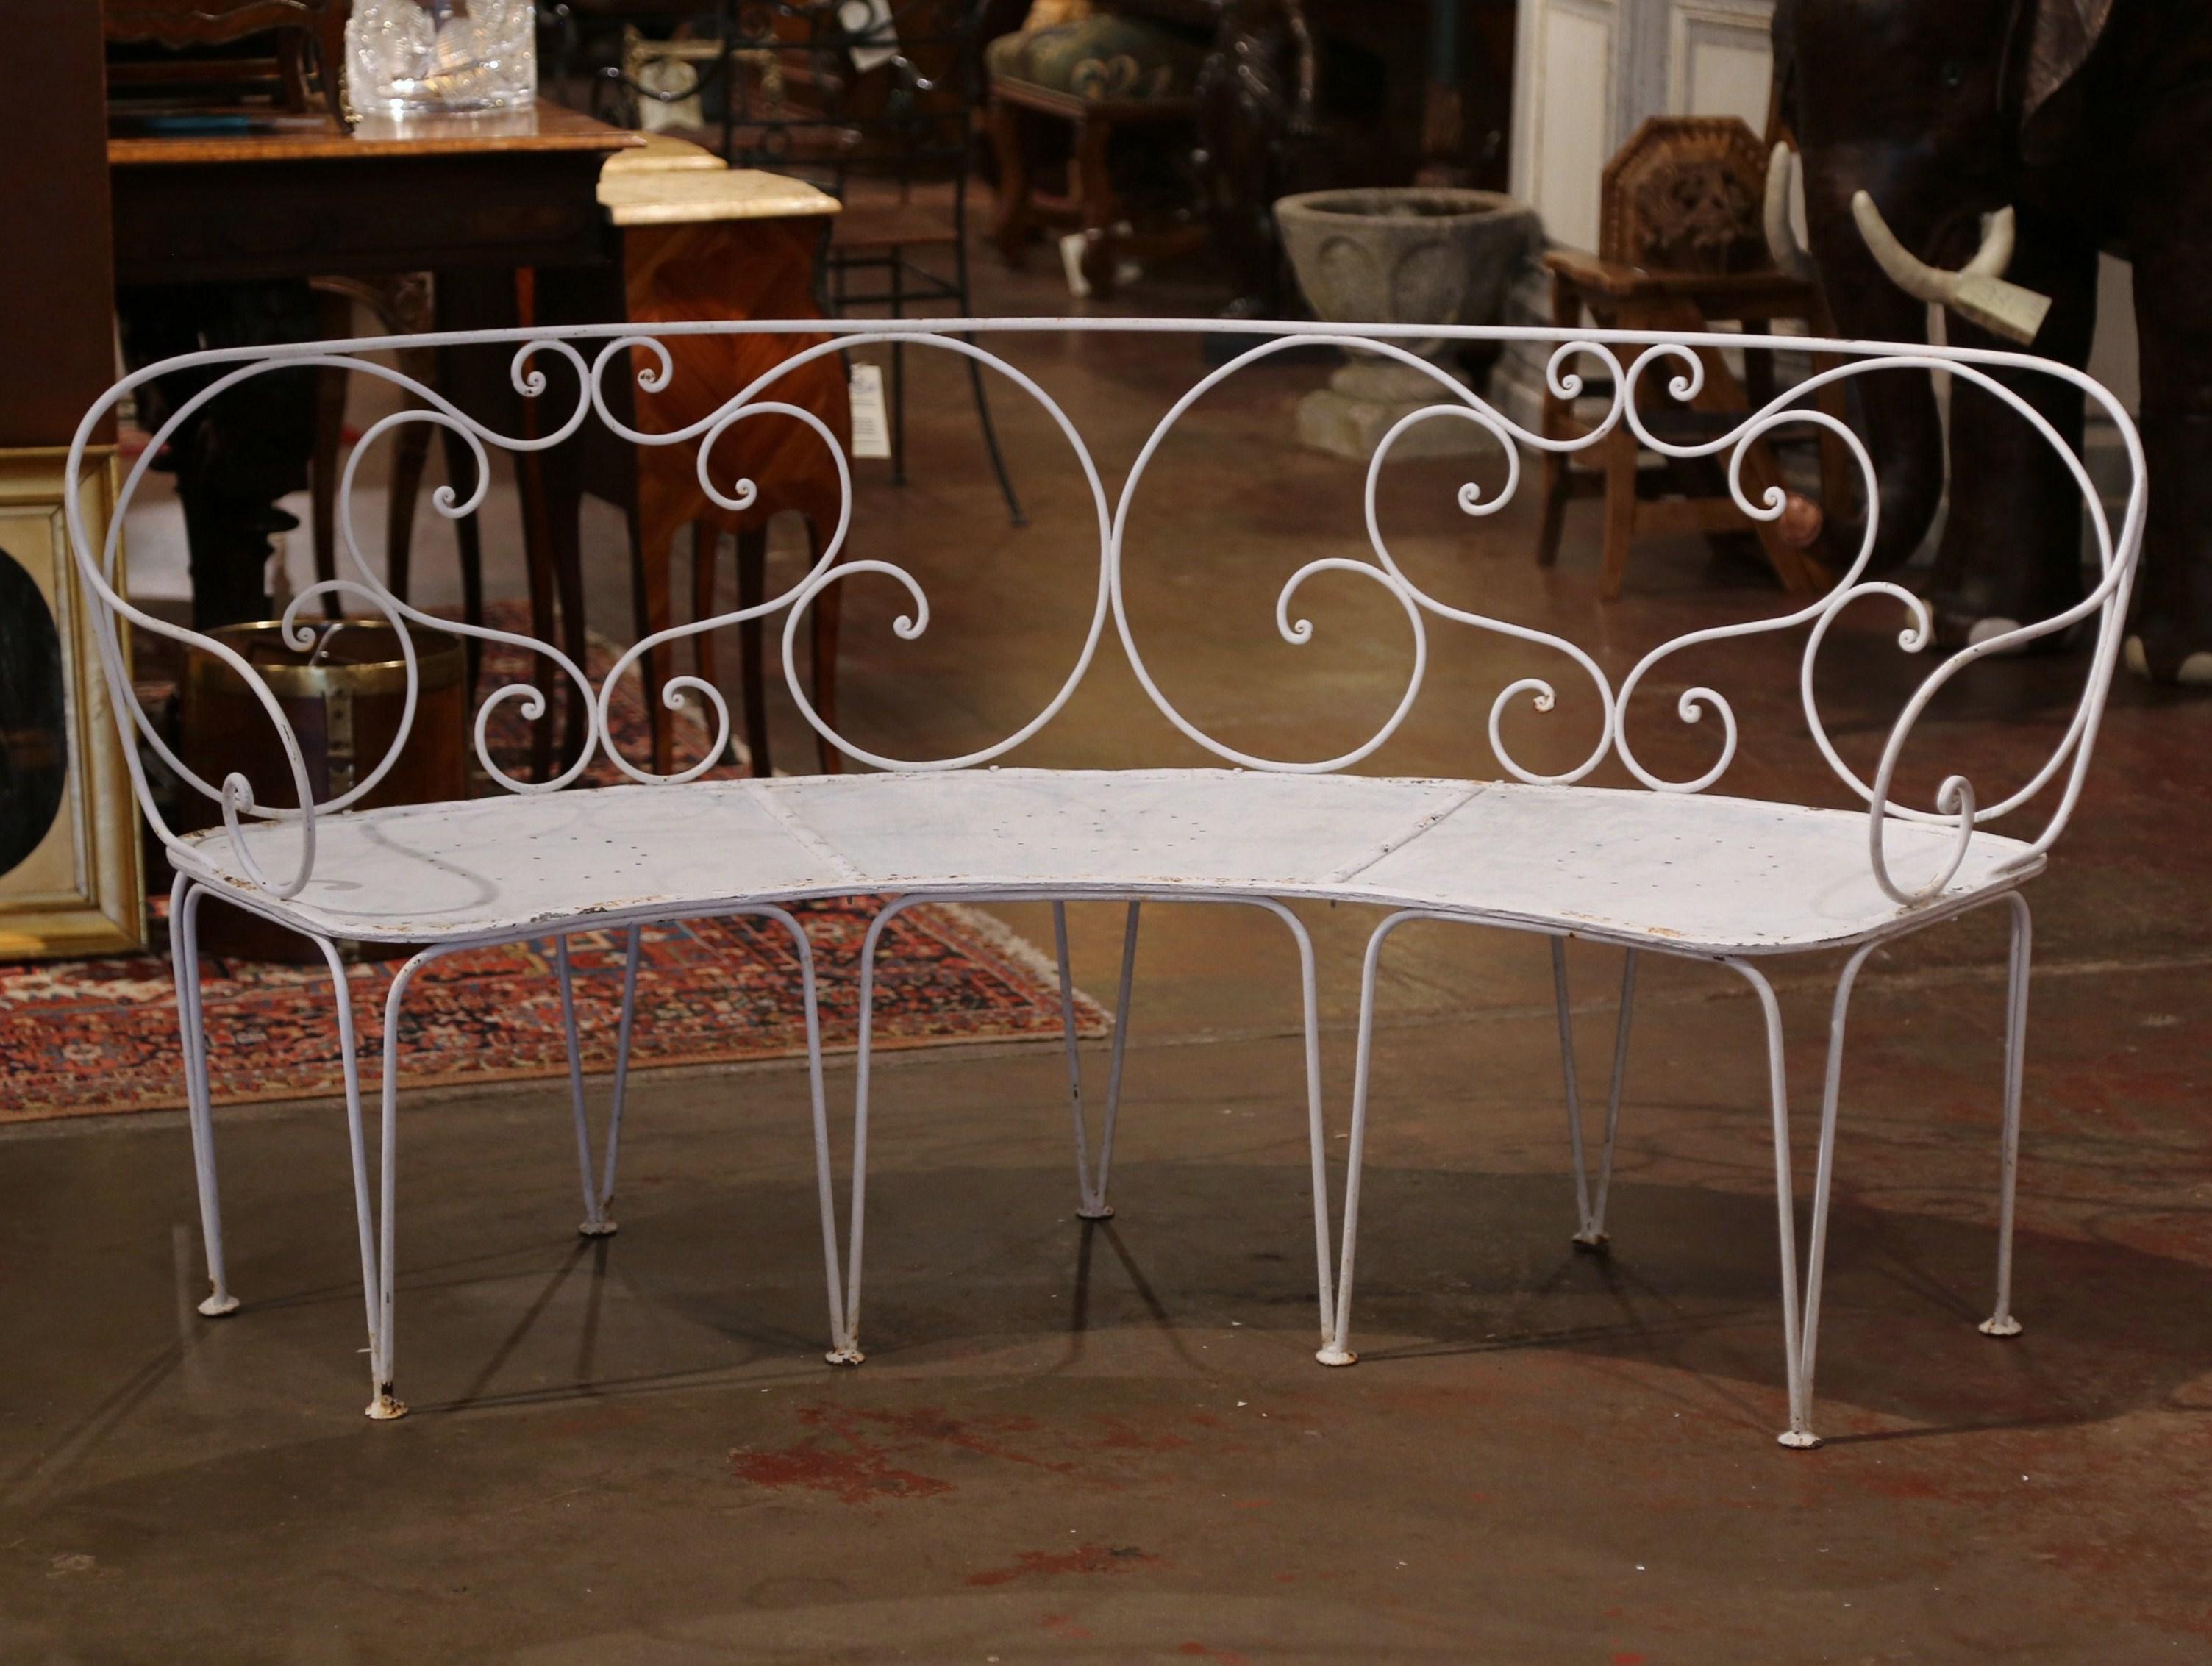 19th Century French Curved Painted Iron Three-Seat Garden Bench from Normandy 1